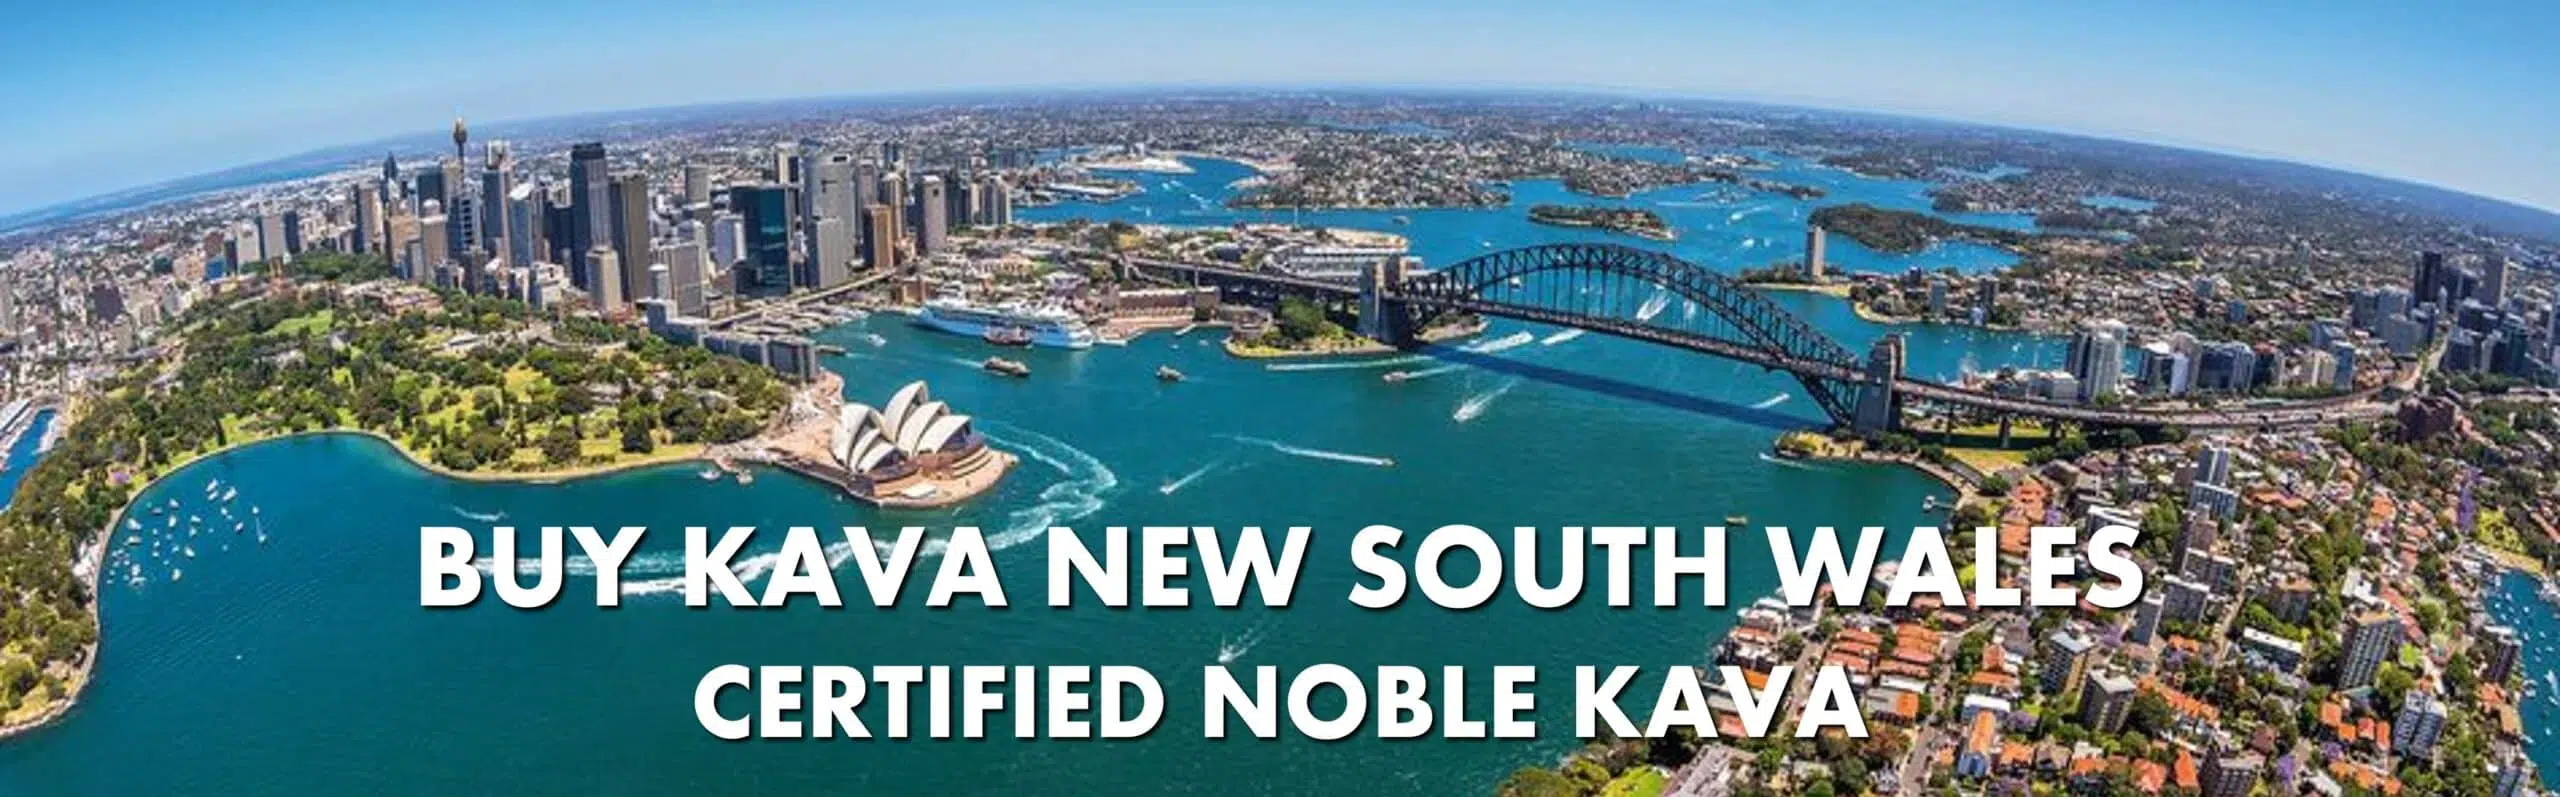 Birds eye view of Sydney Harbour New South Wales with caption Buy Kava New South Wales